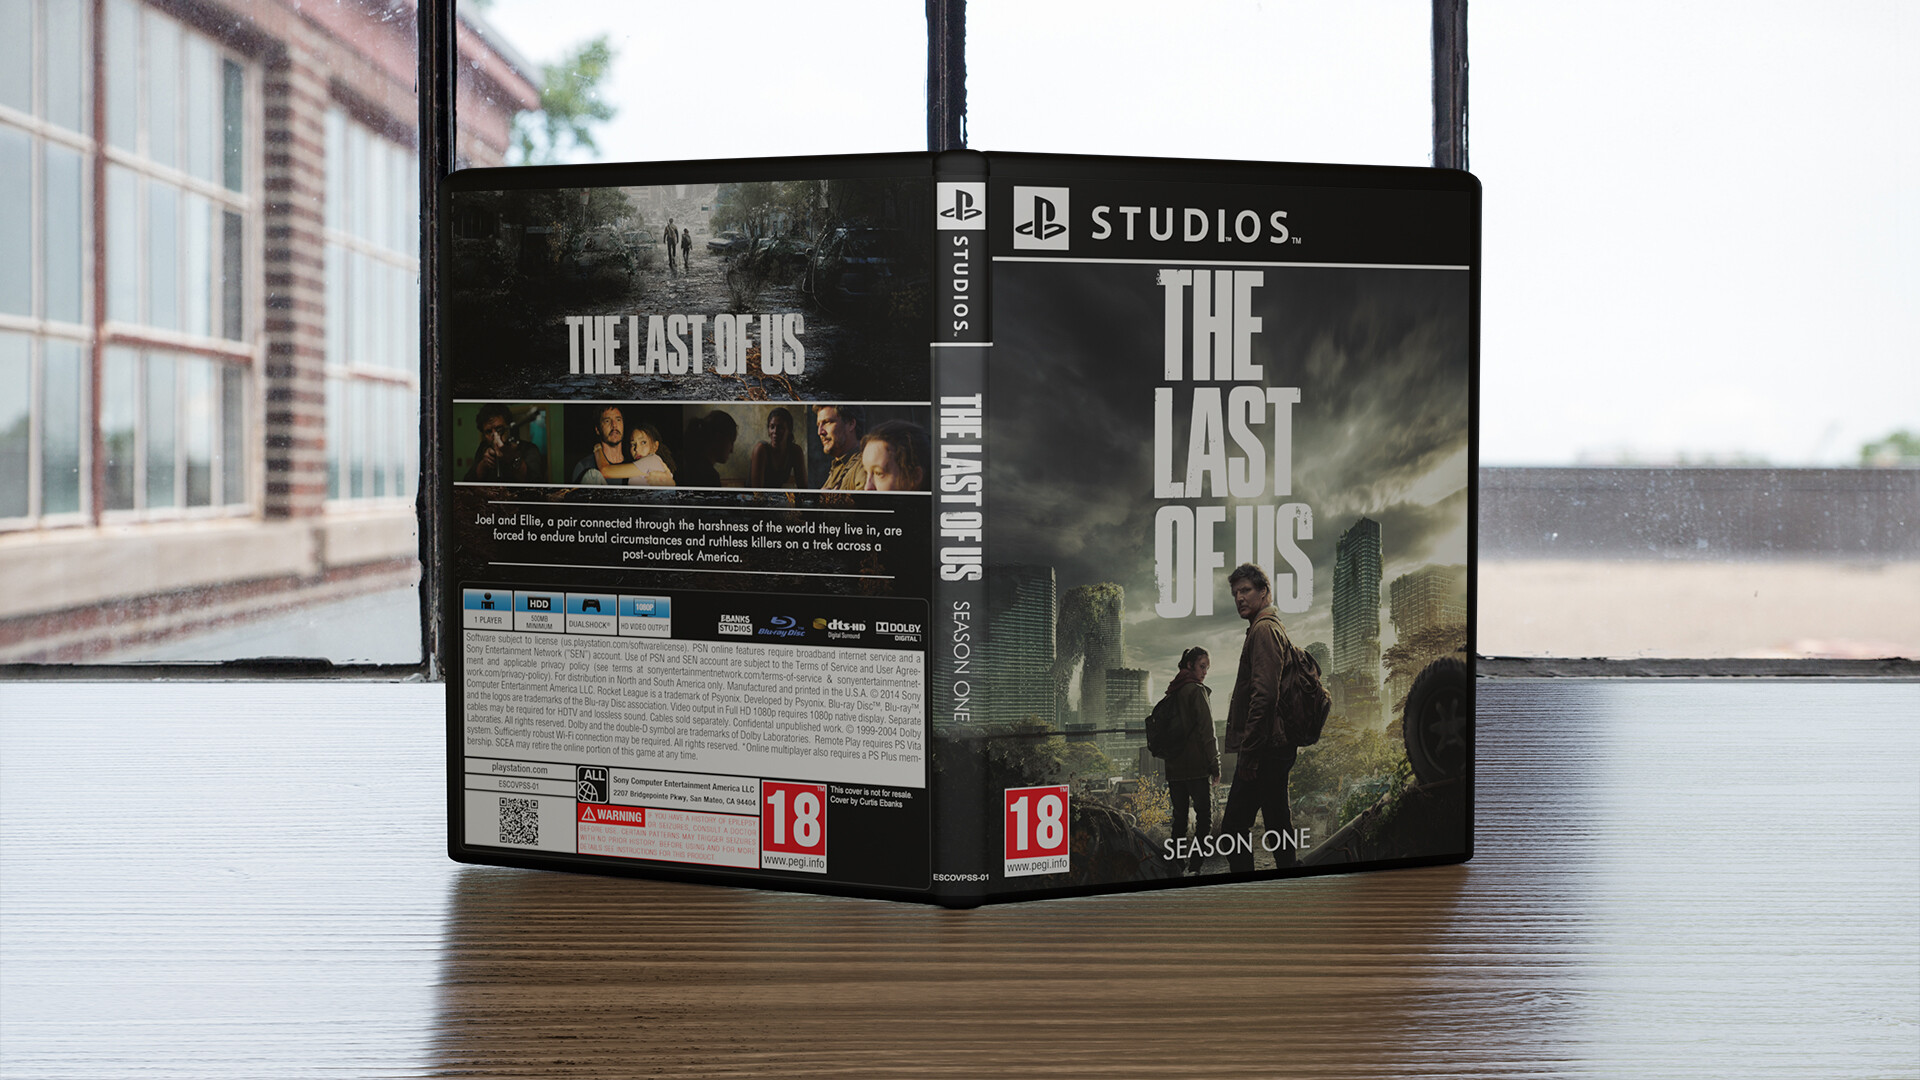 The Last of Us: The Complete First Season [Blu-ray]